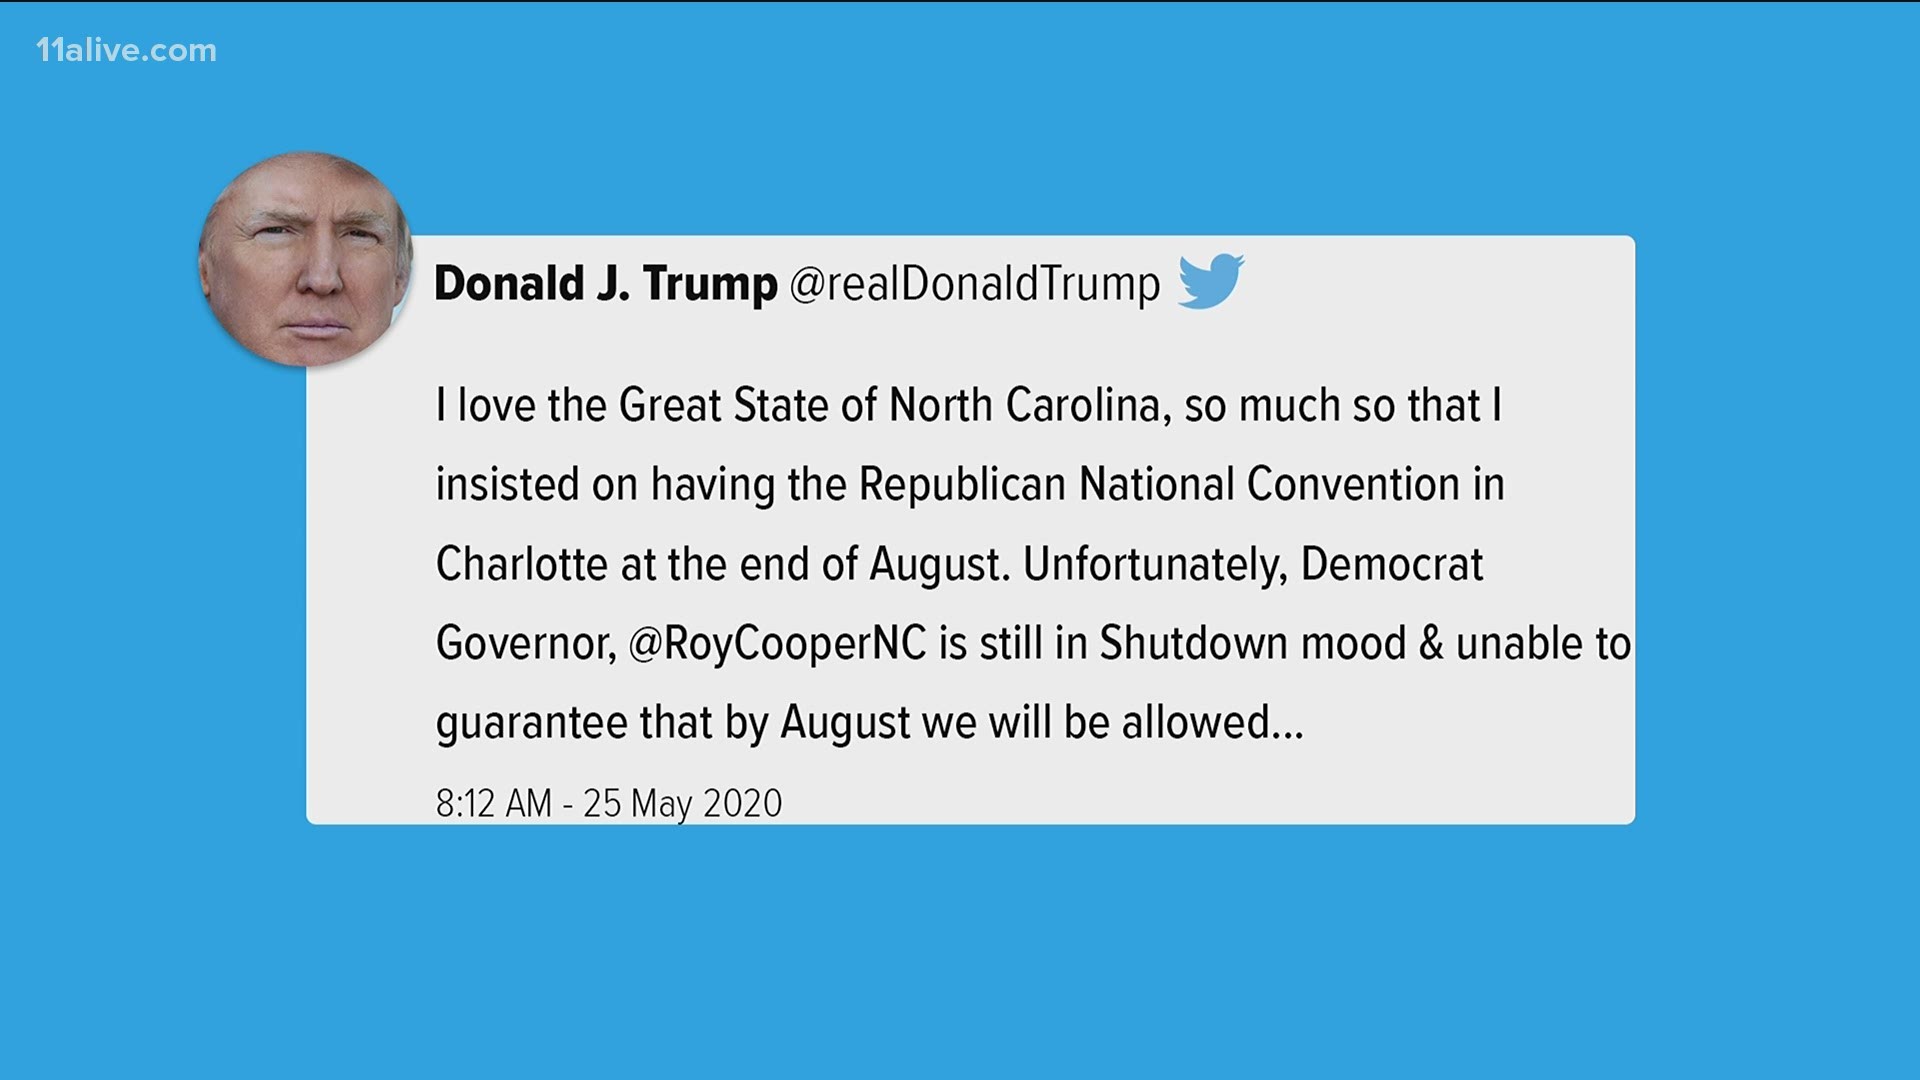 The president has indicated he wants to be able to fully fill an arena for the Republican National Convention.